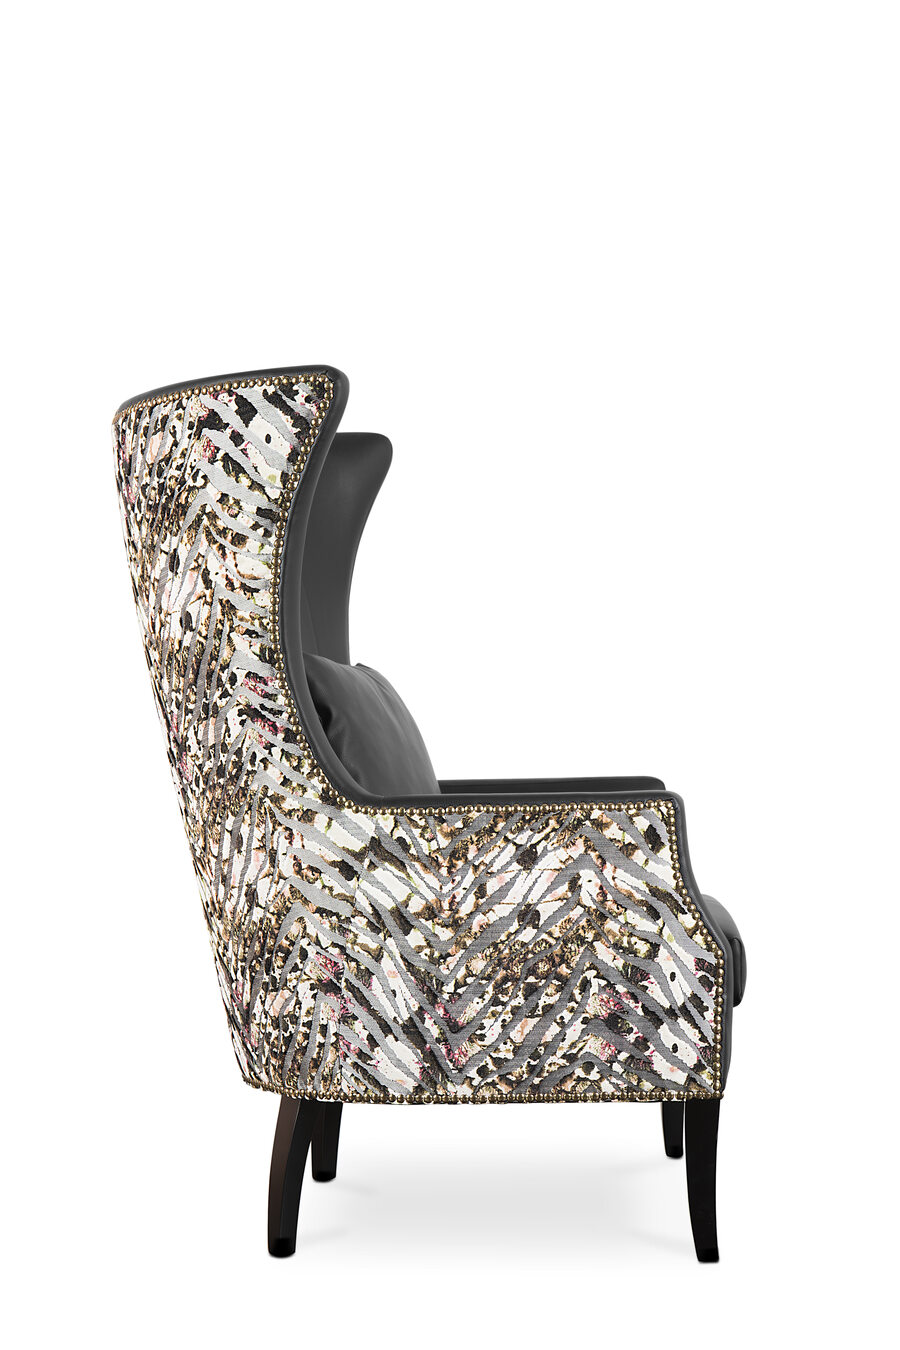 modern office chair with pattern trends animal prints